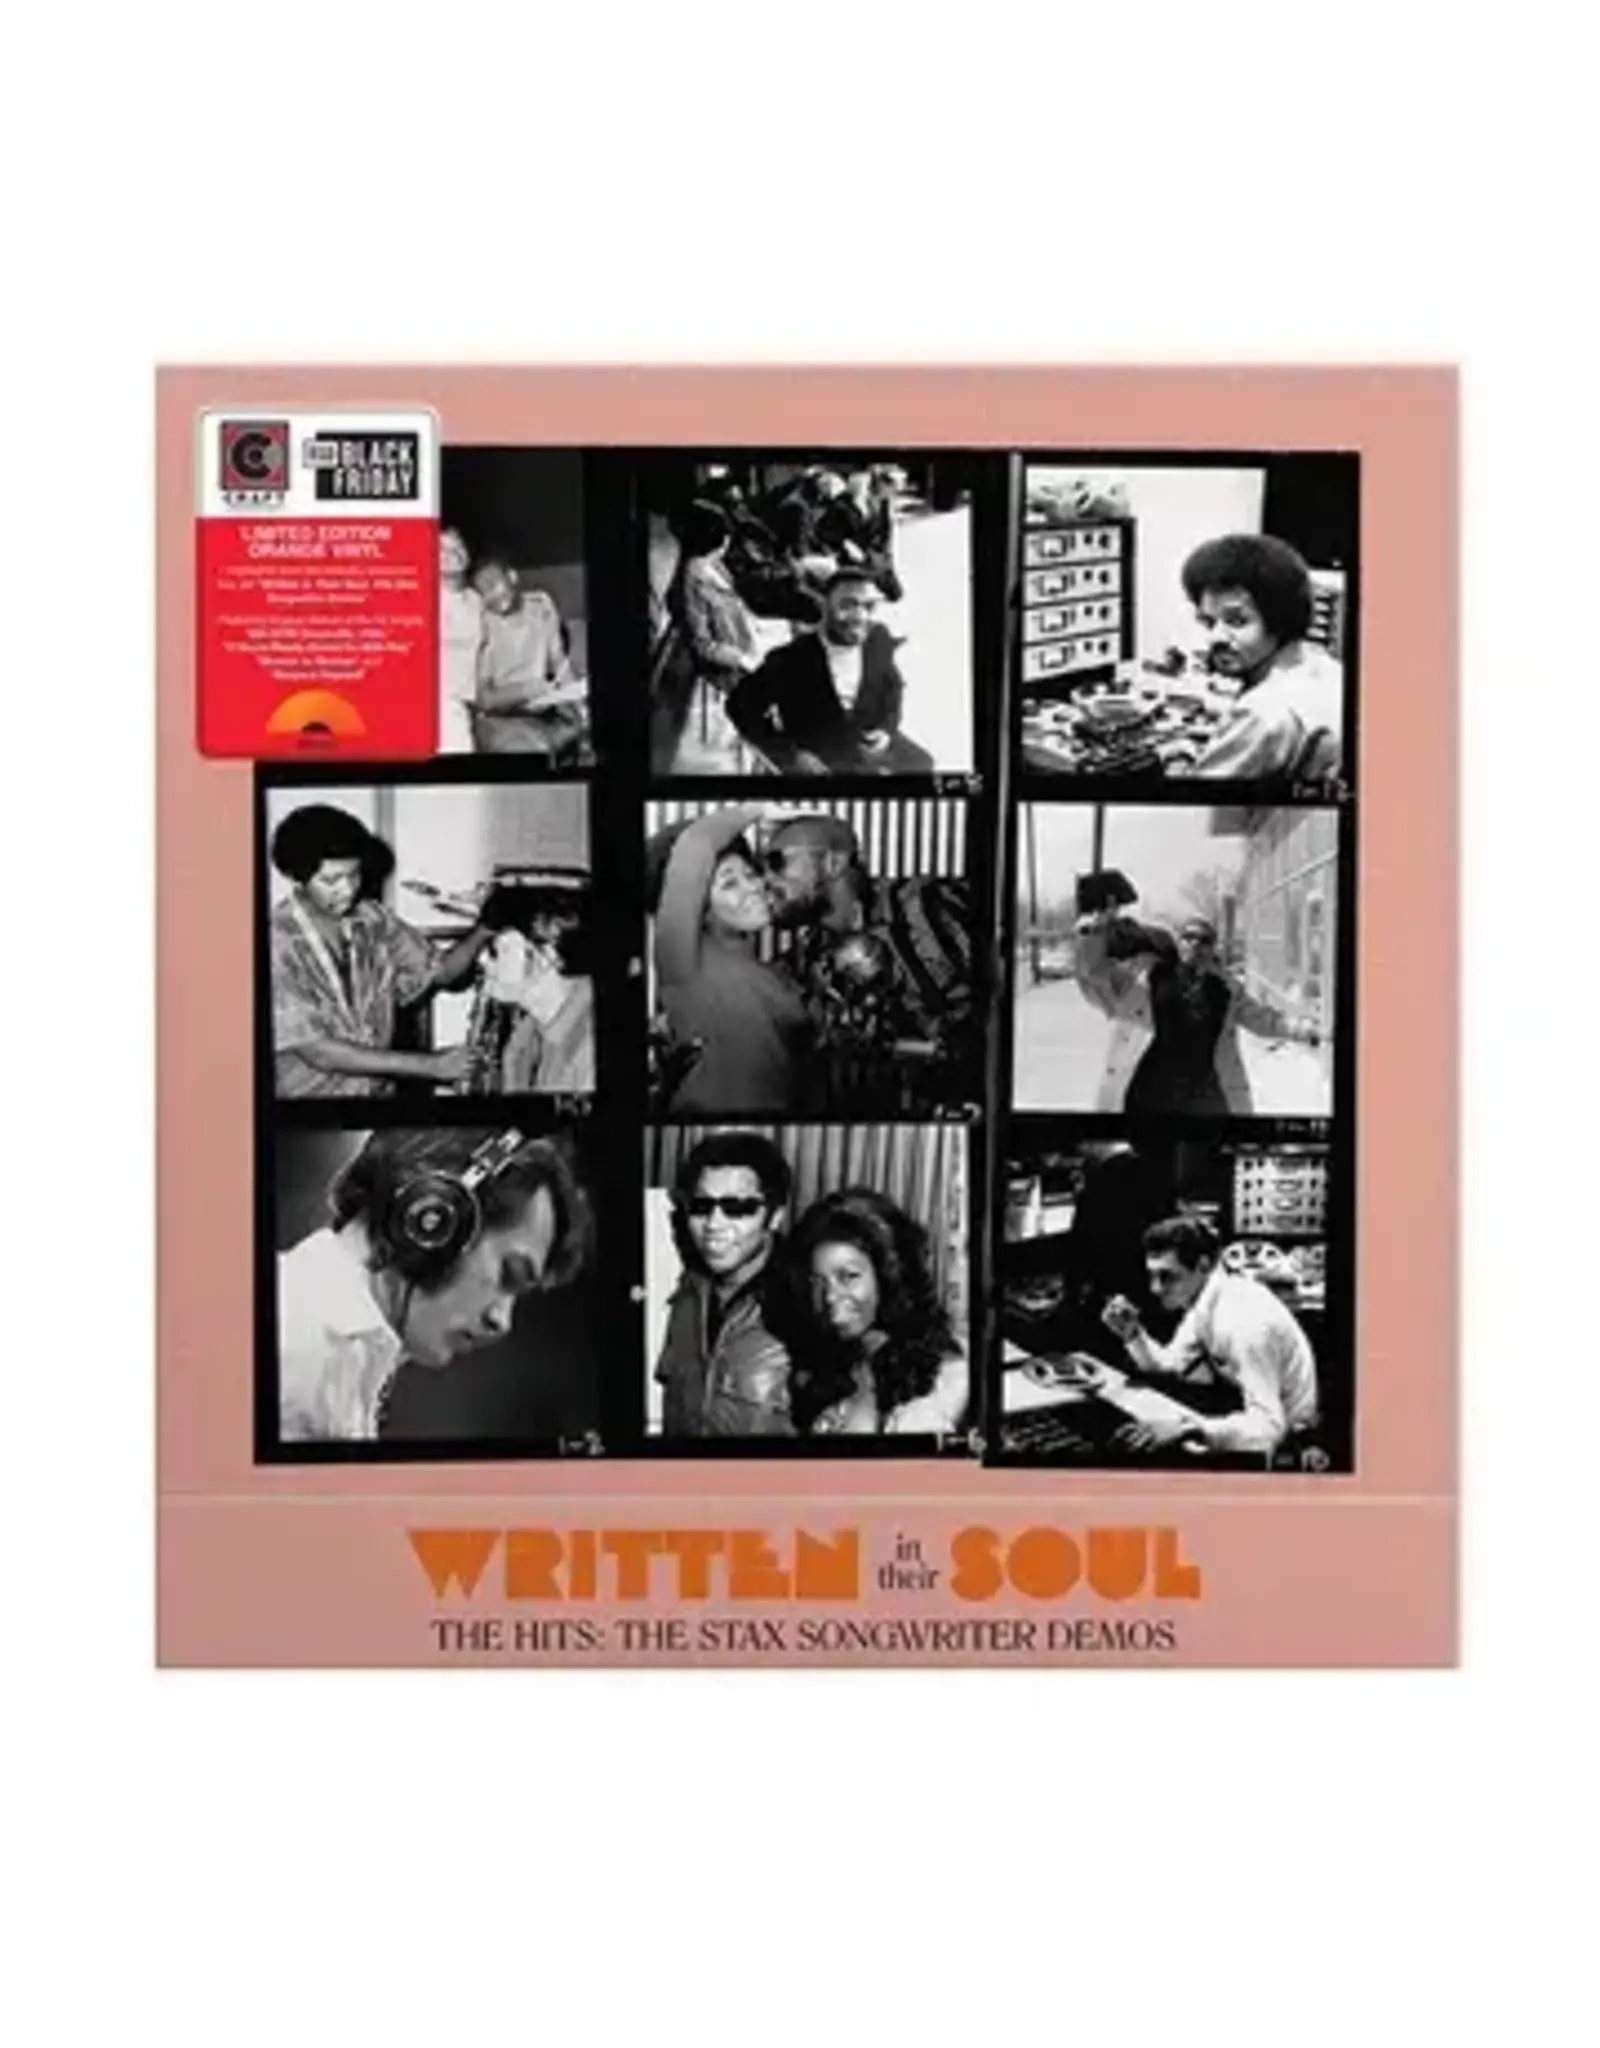 Craft Various: 2023BF - Written In Their Soul The Hits: The Stax Songwriter Demos (orange) LP